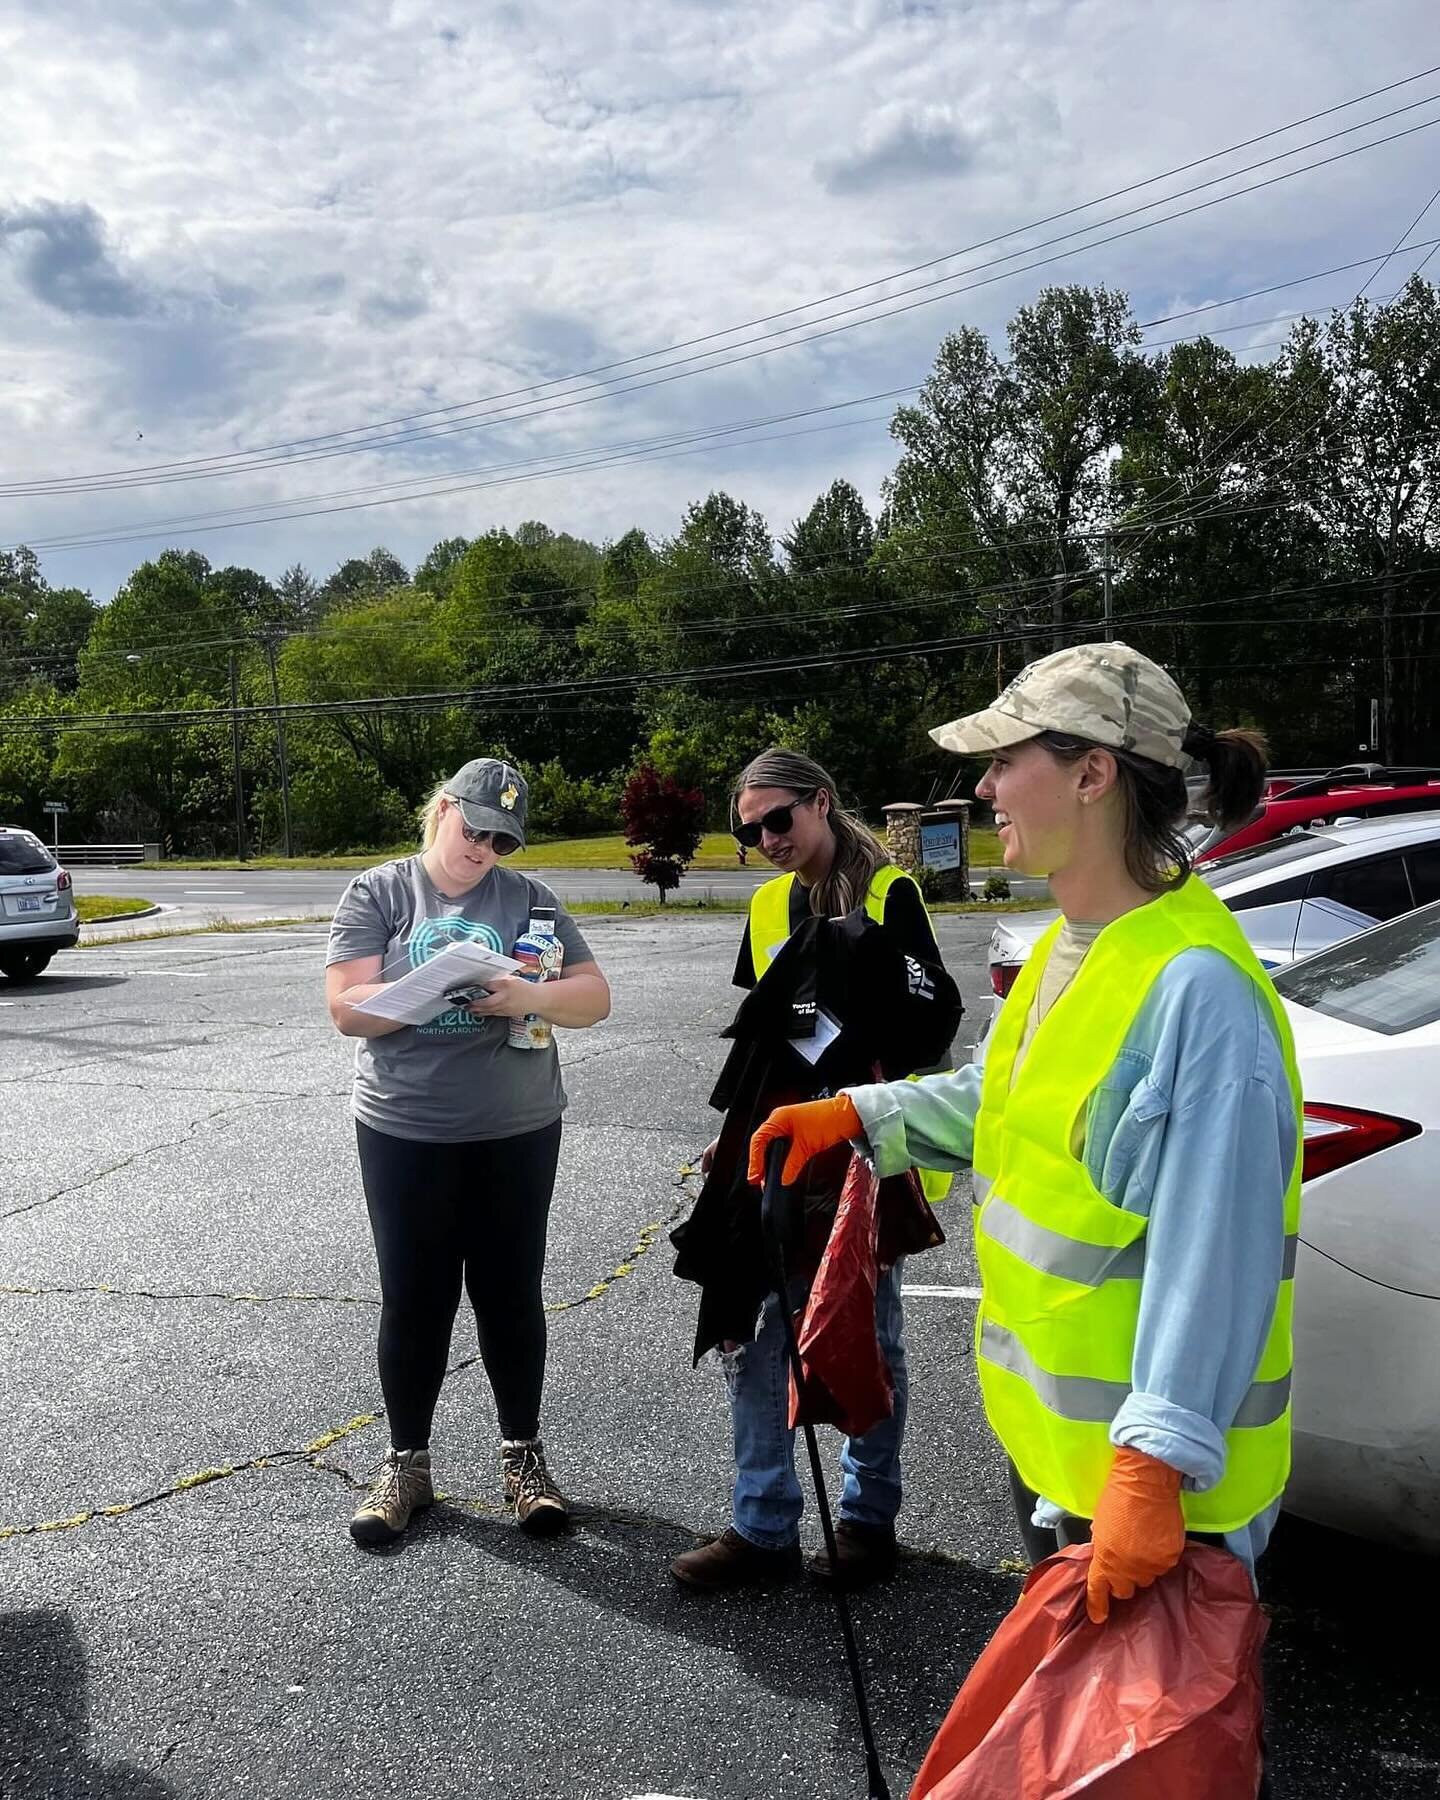 🌎🌿 Tomorrow!!! If you're picking up litter with us tomorrow (4 -5:30 pm) be sure to register if you haven't already (link in bio).
‼️ We will be meeting at 3:45 pm in the parking lot of Rosa De Saron Church Located at 500 E Fleming Dr. Morganton.
?